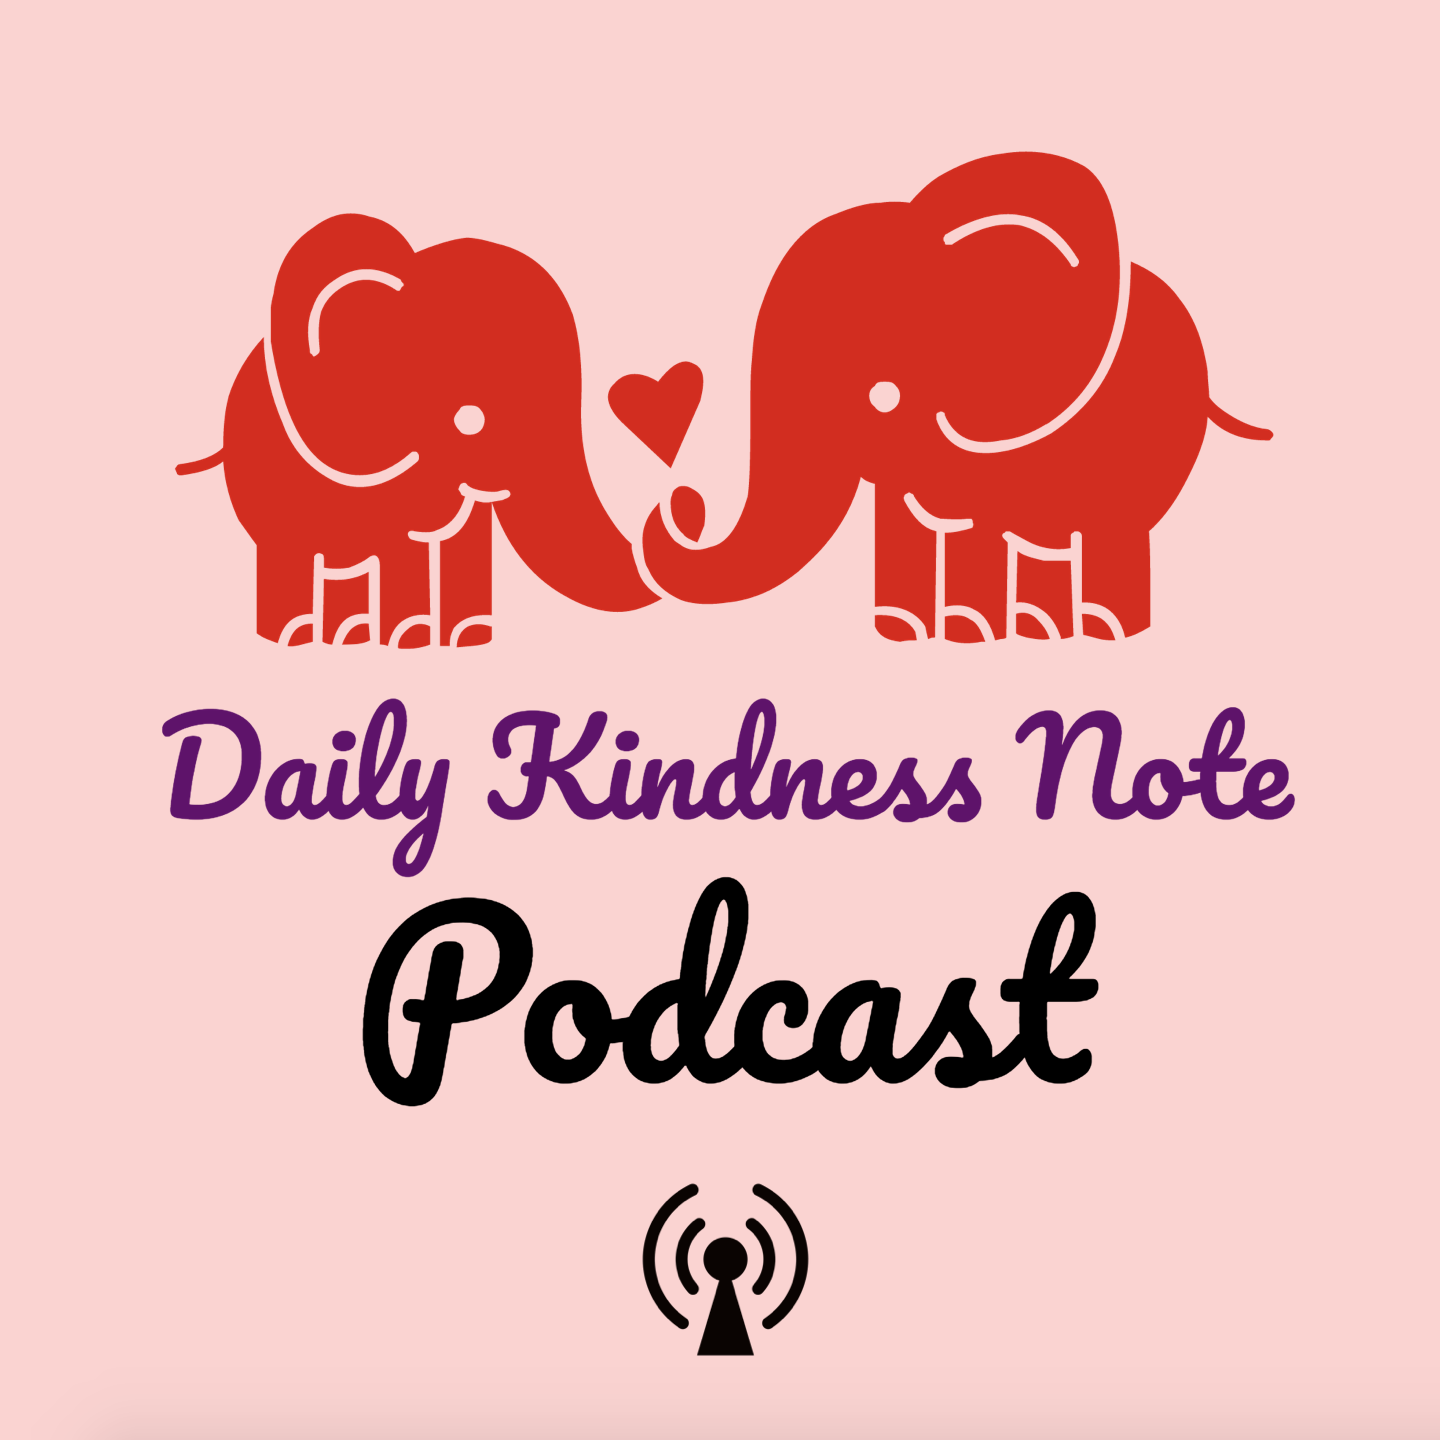 Daily Kindness Note Podcast - Ep. 10: Laughter Really Is the Best Medicine